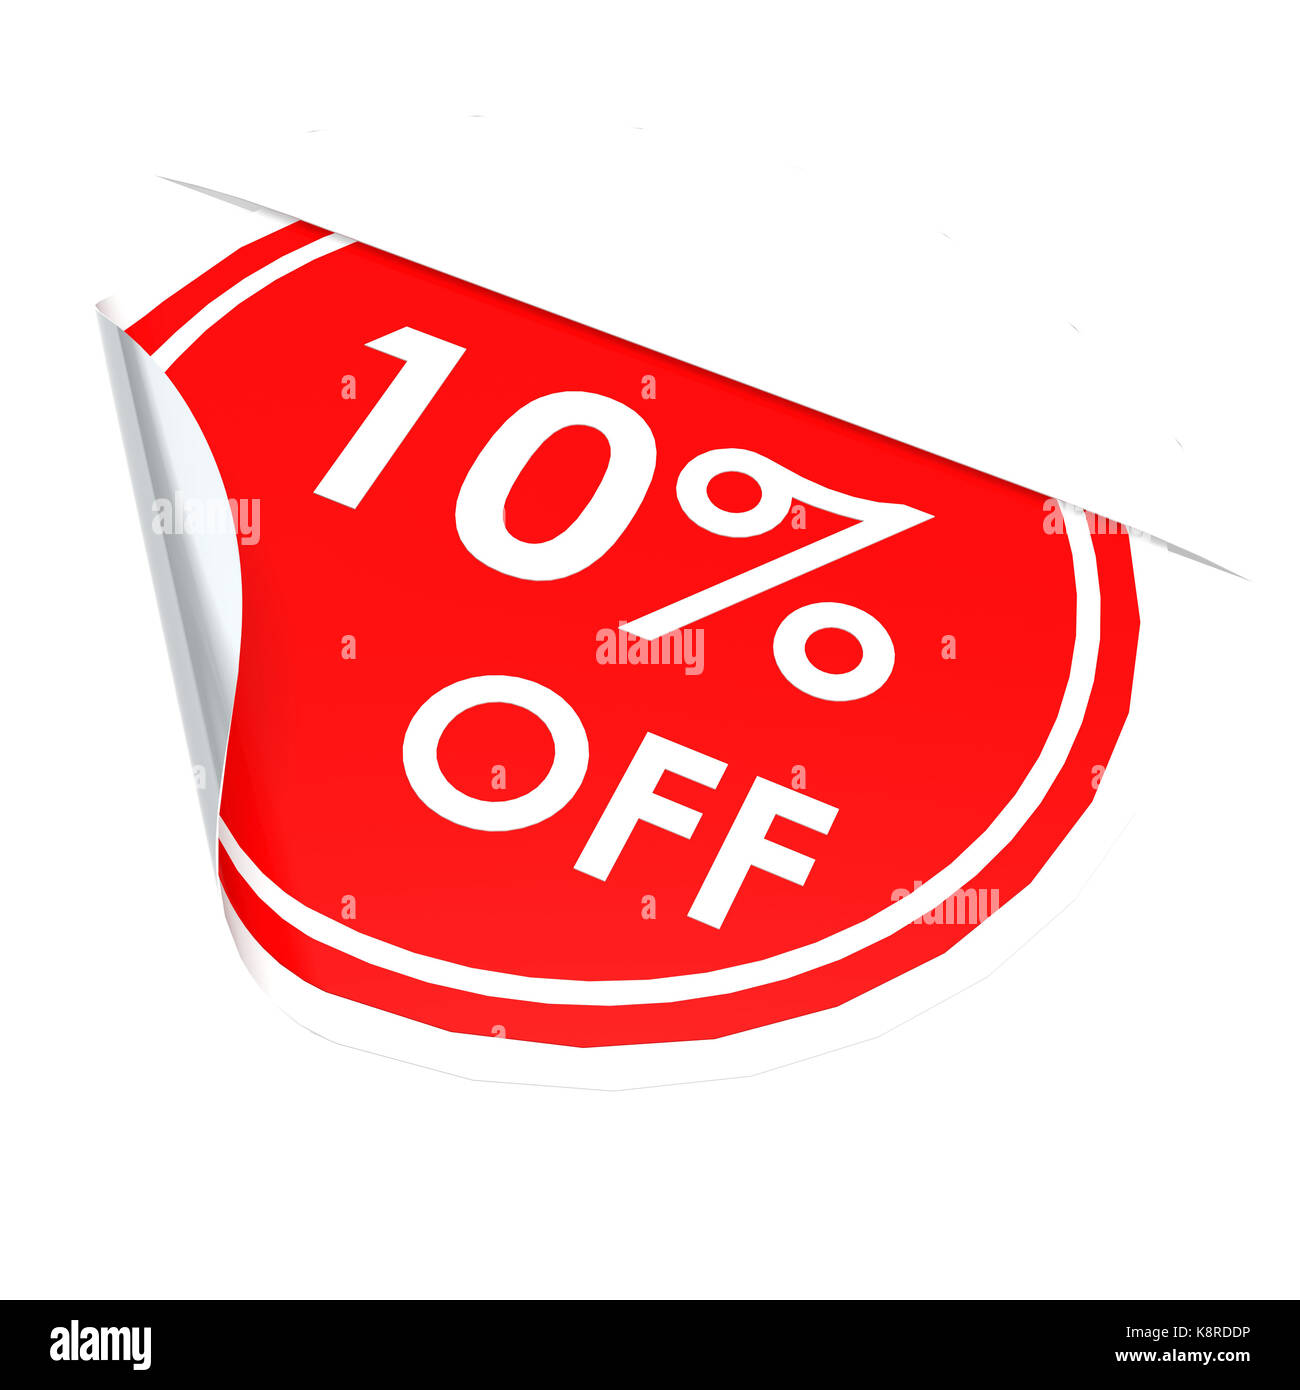 Red circle label 10 percent off Stock Photo